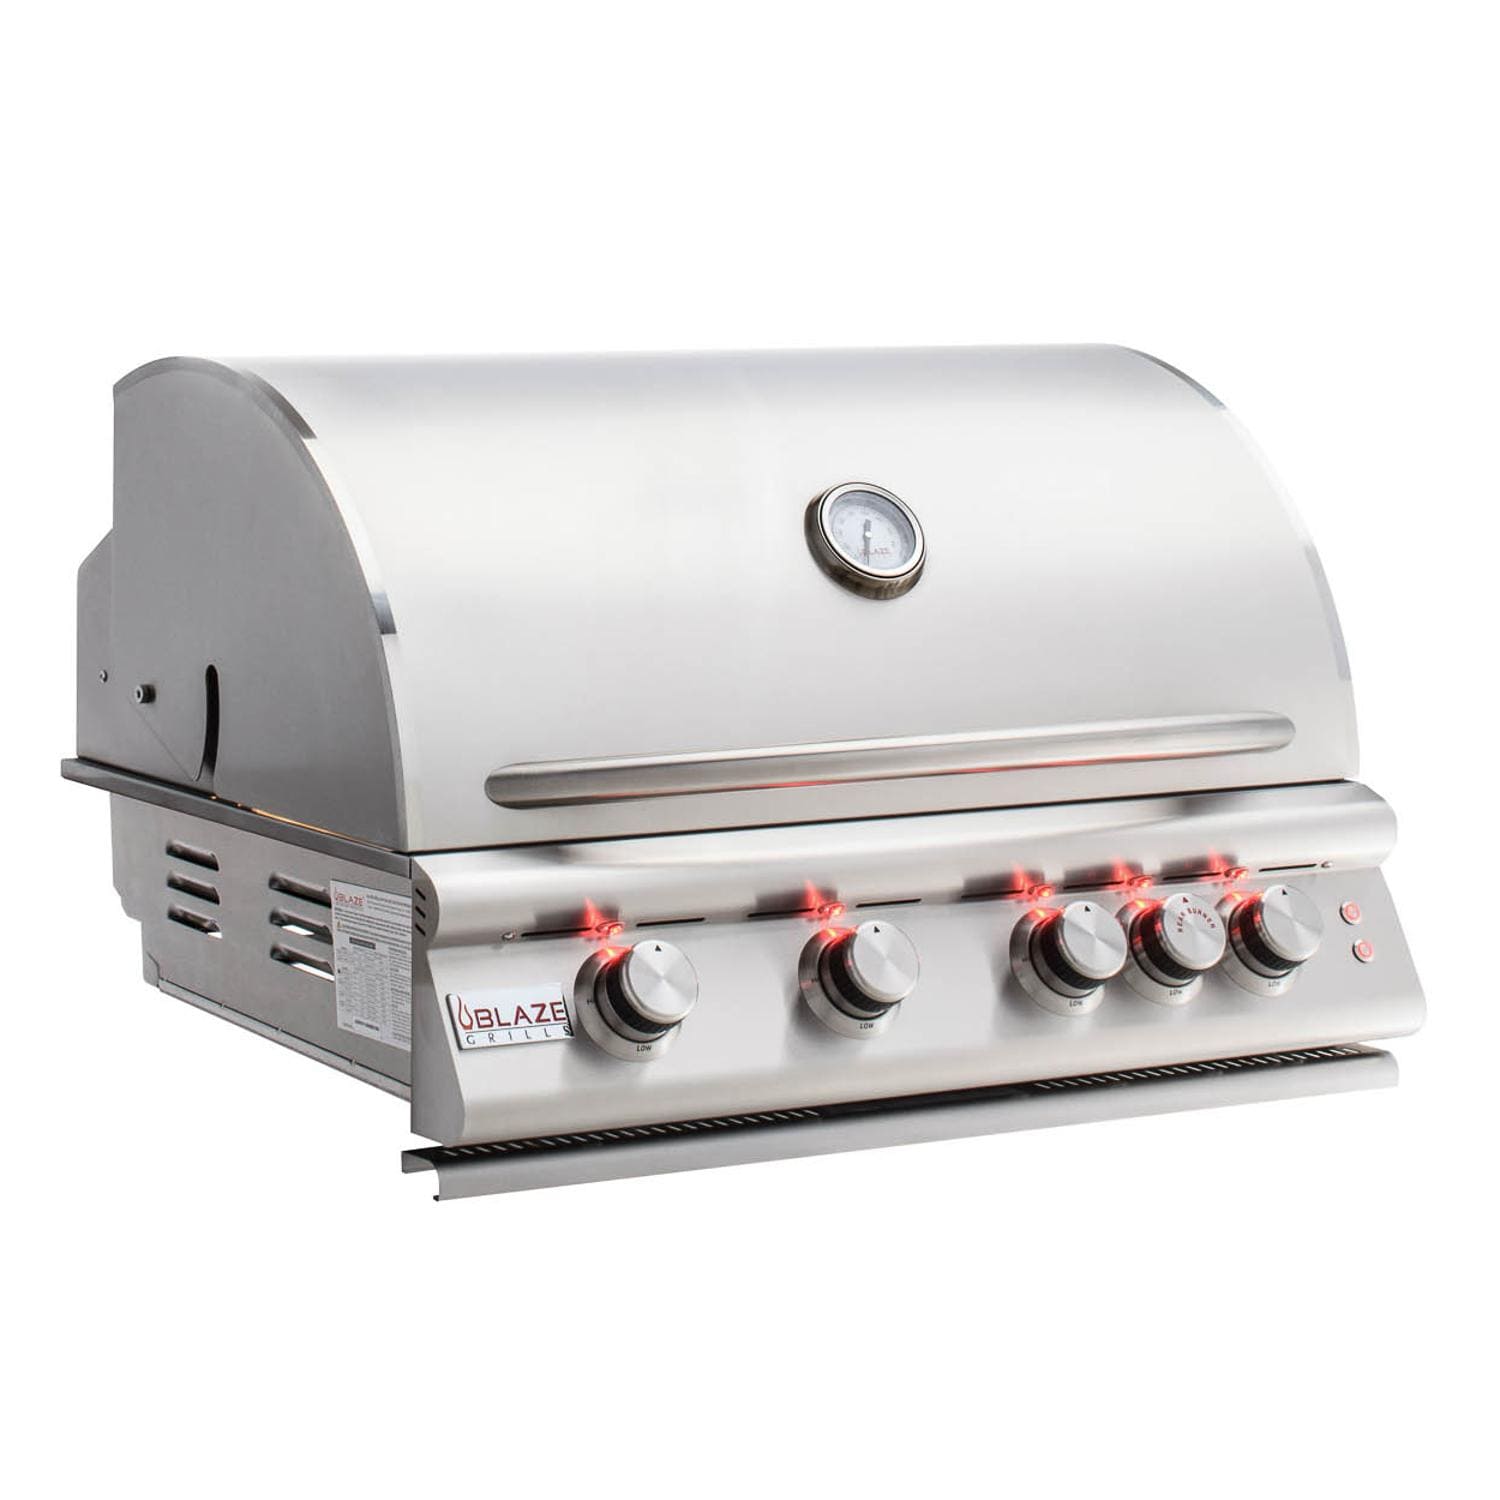 Blaze Marine Grade Stainless Steel Built-In Natural Gas Grill with Lights, 32" - image 2 of 6